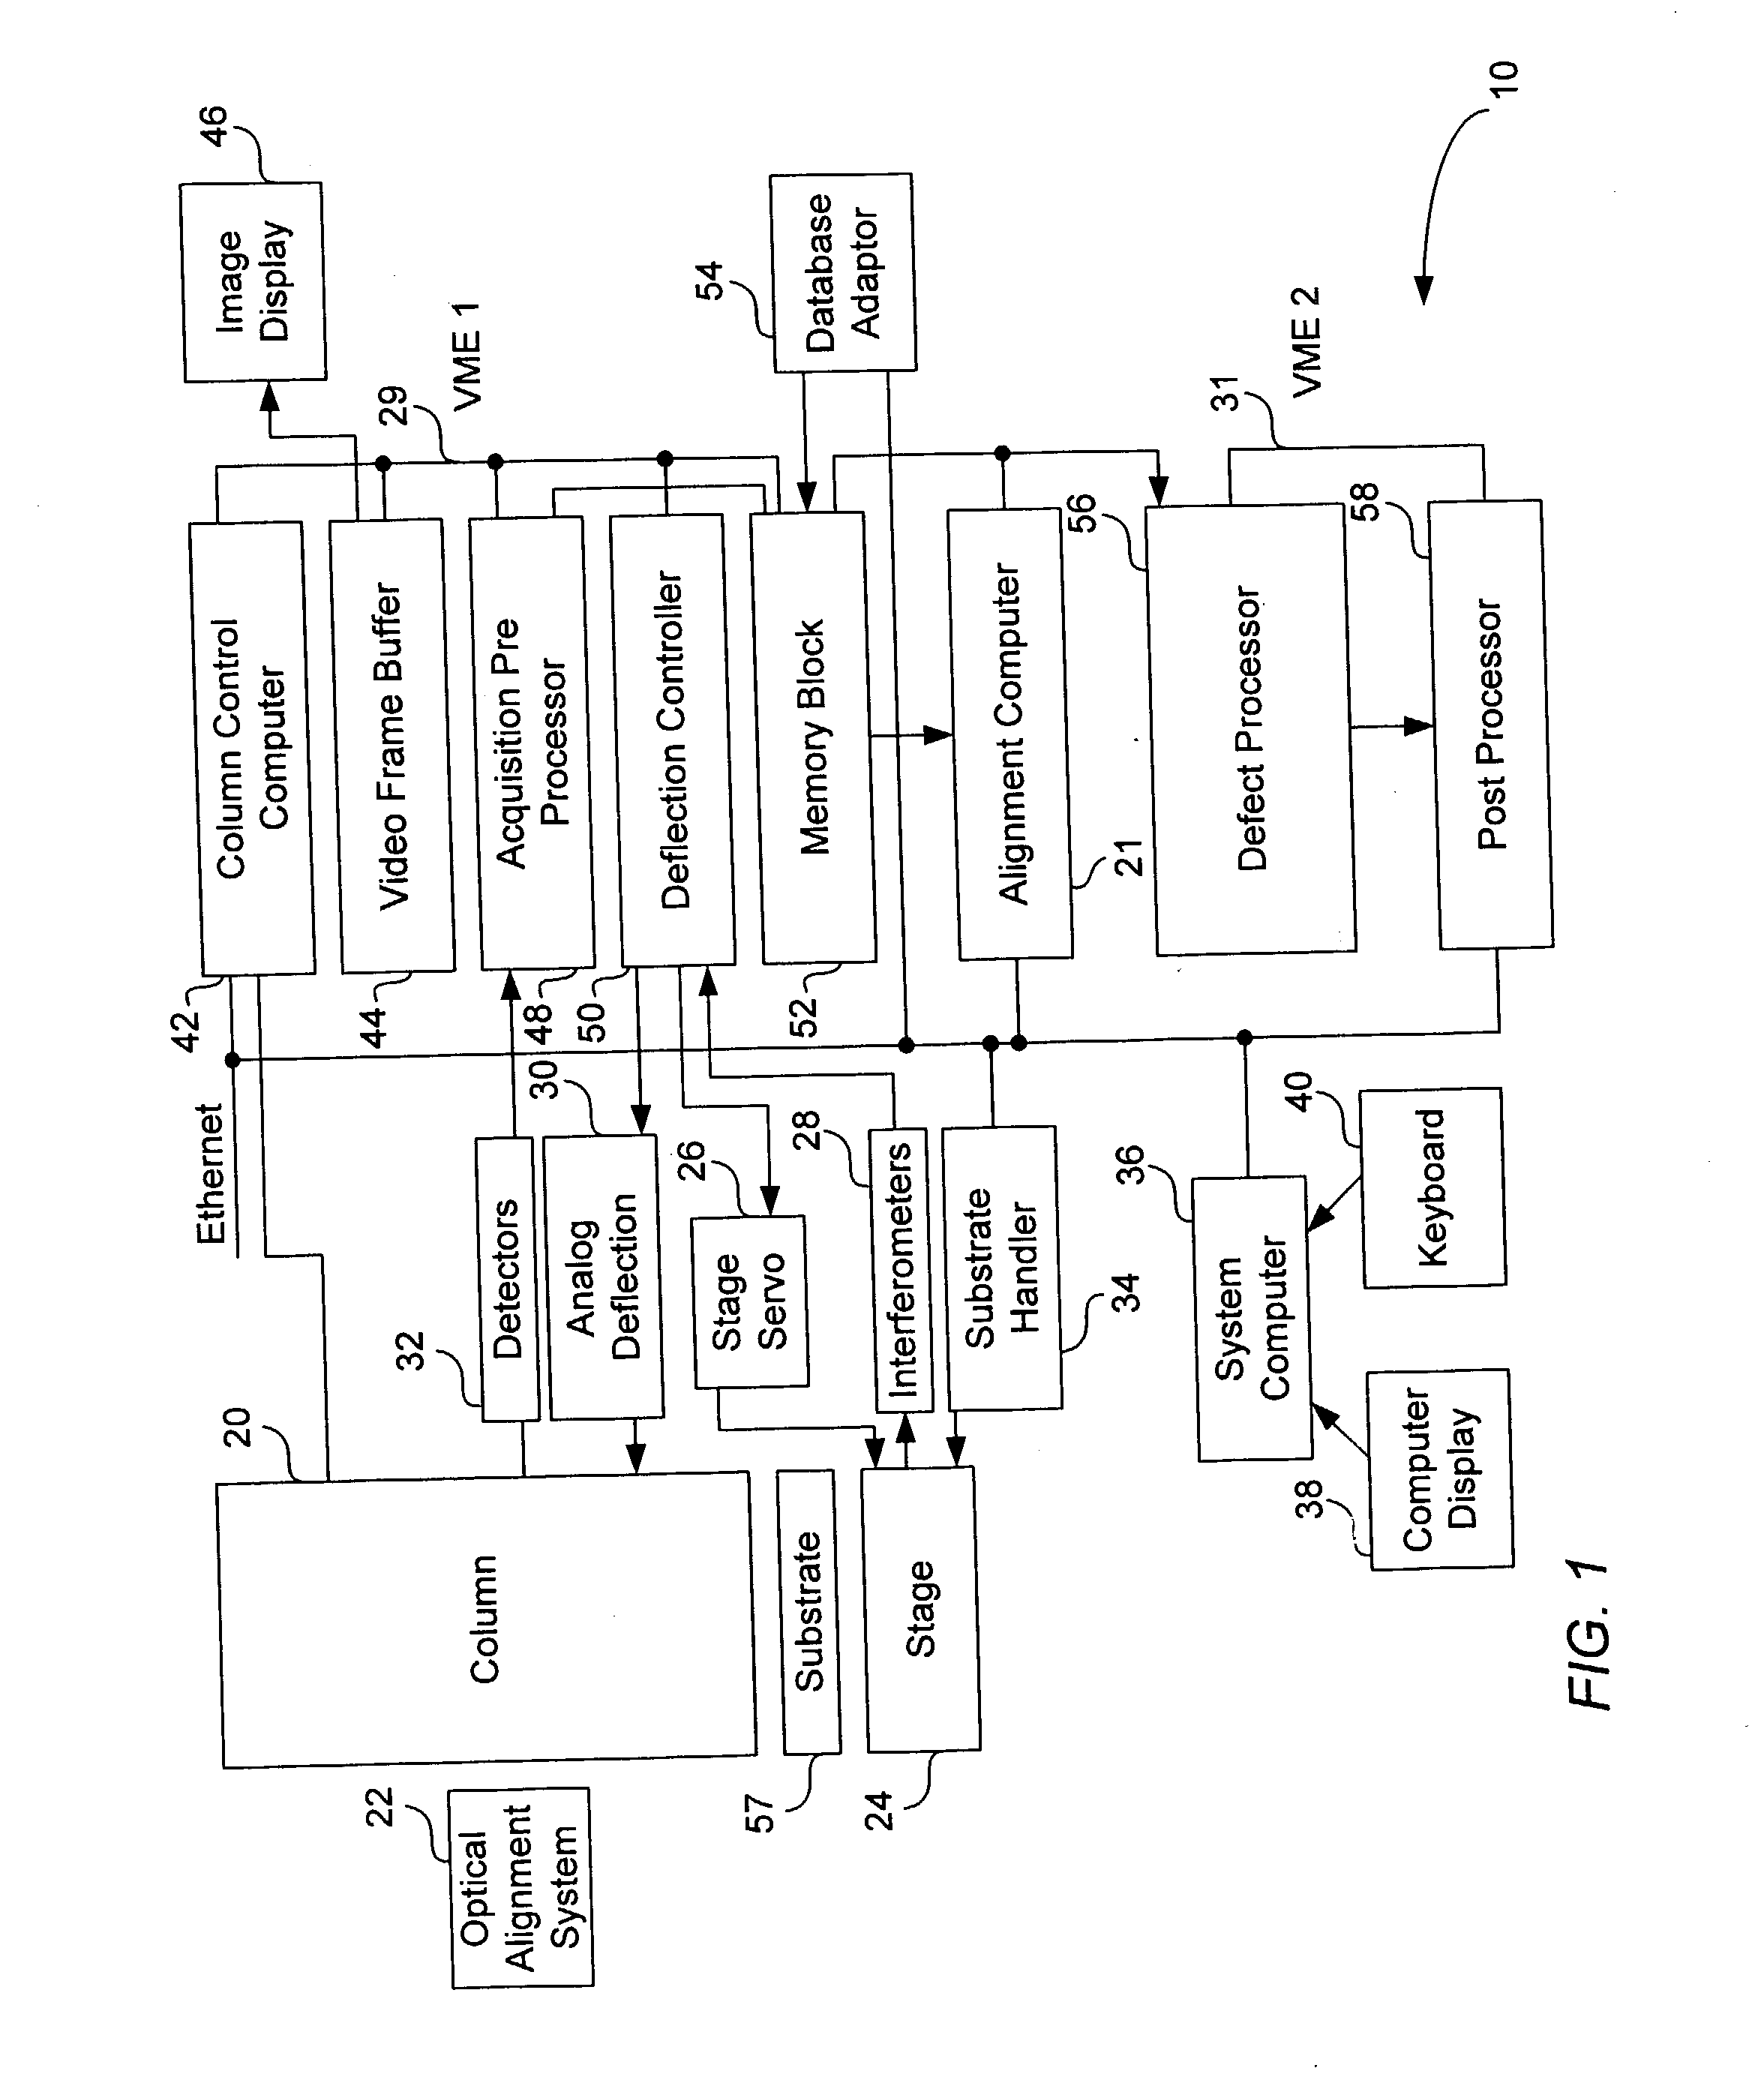 Multiple directional scans of test structures on srmiconductor integrated circuits